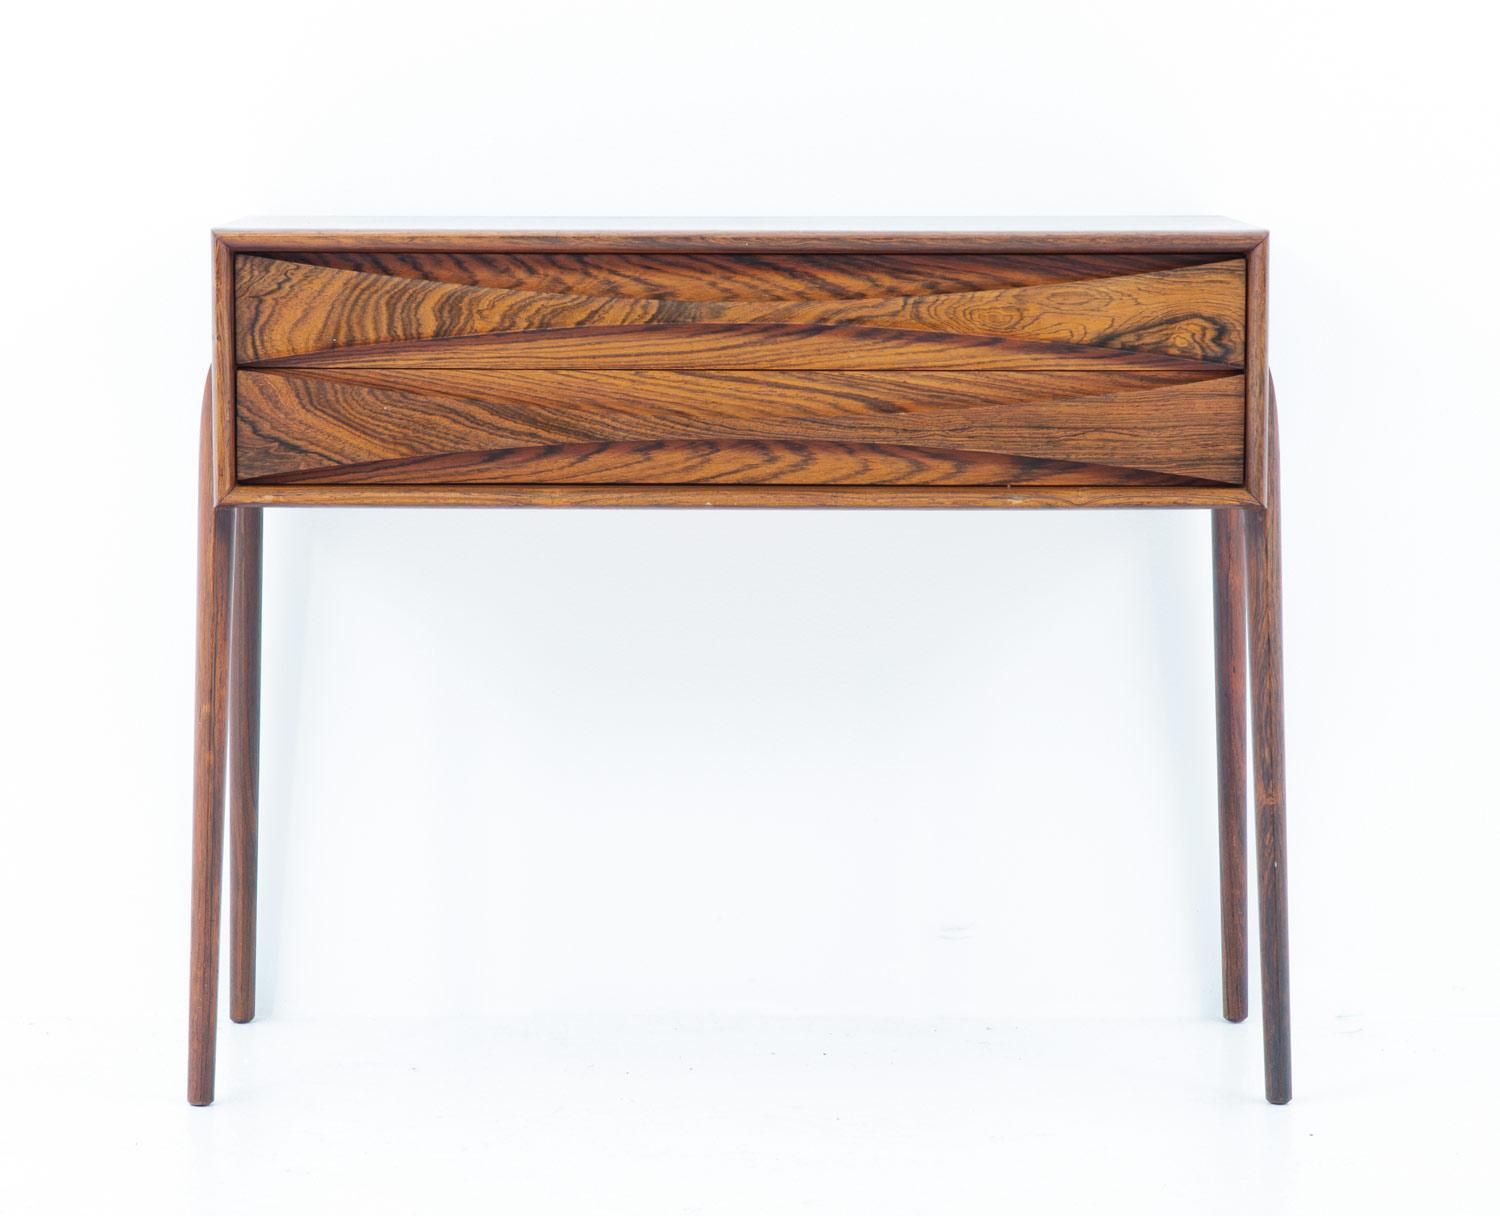 Stunning side table in rosewood, model 6835 by Rimbert Sandholt for Glas & Trä. 
This table features great details, such as the sculptural legs, matching the Arne Vodder-style drawers. 

Condition: Very good original condition with light signs of